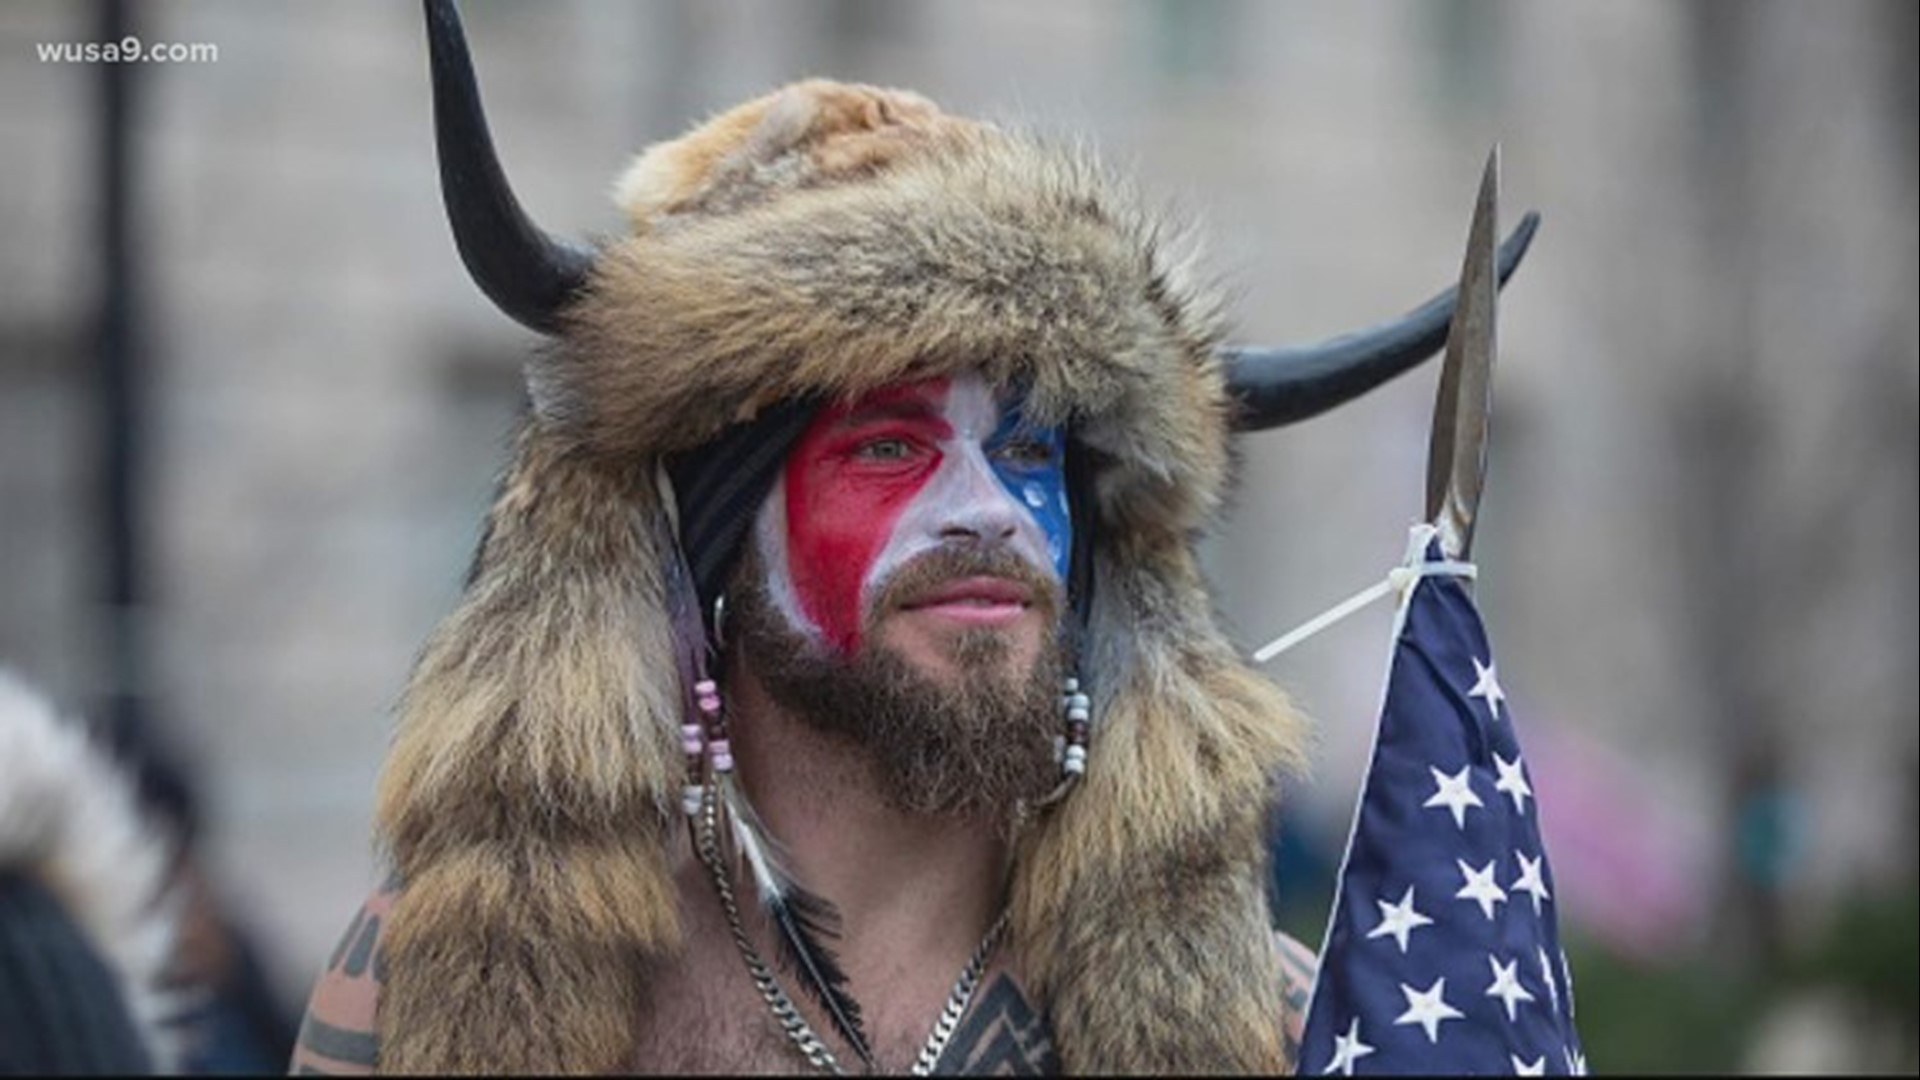 Jacob Chansley, the Arizona man who wore a horned fur cap and carried a spear into the U.S. Capitol Building on Jan. 6, has been moved to a halfway house.